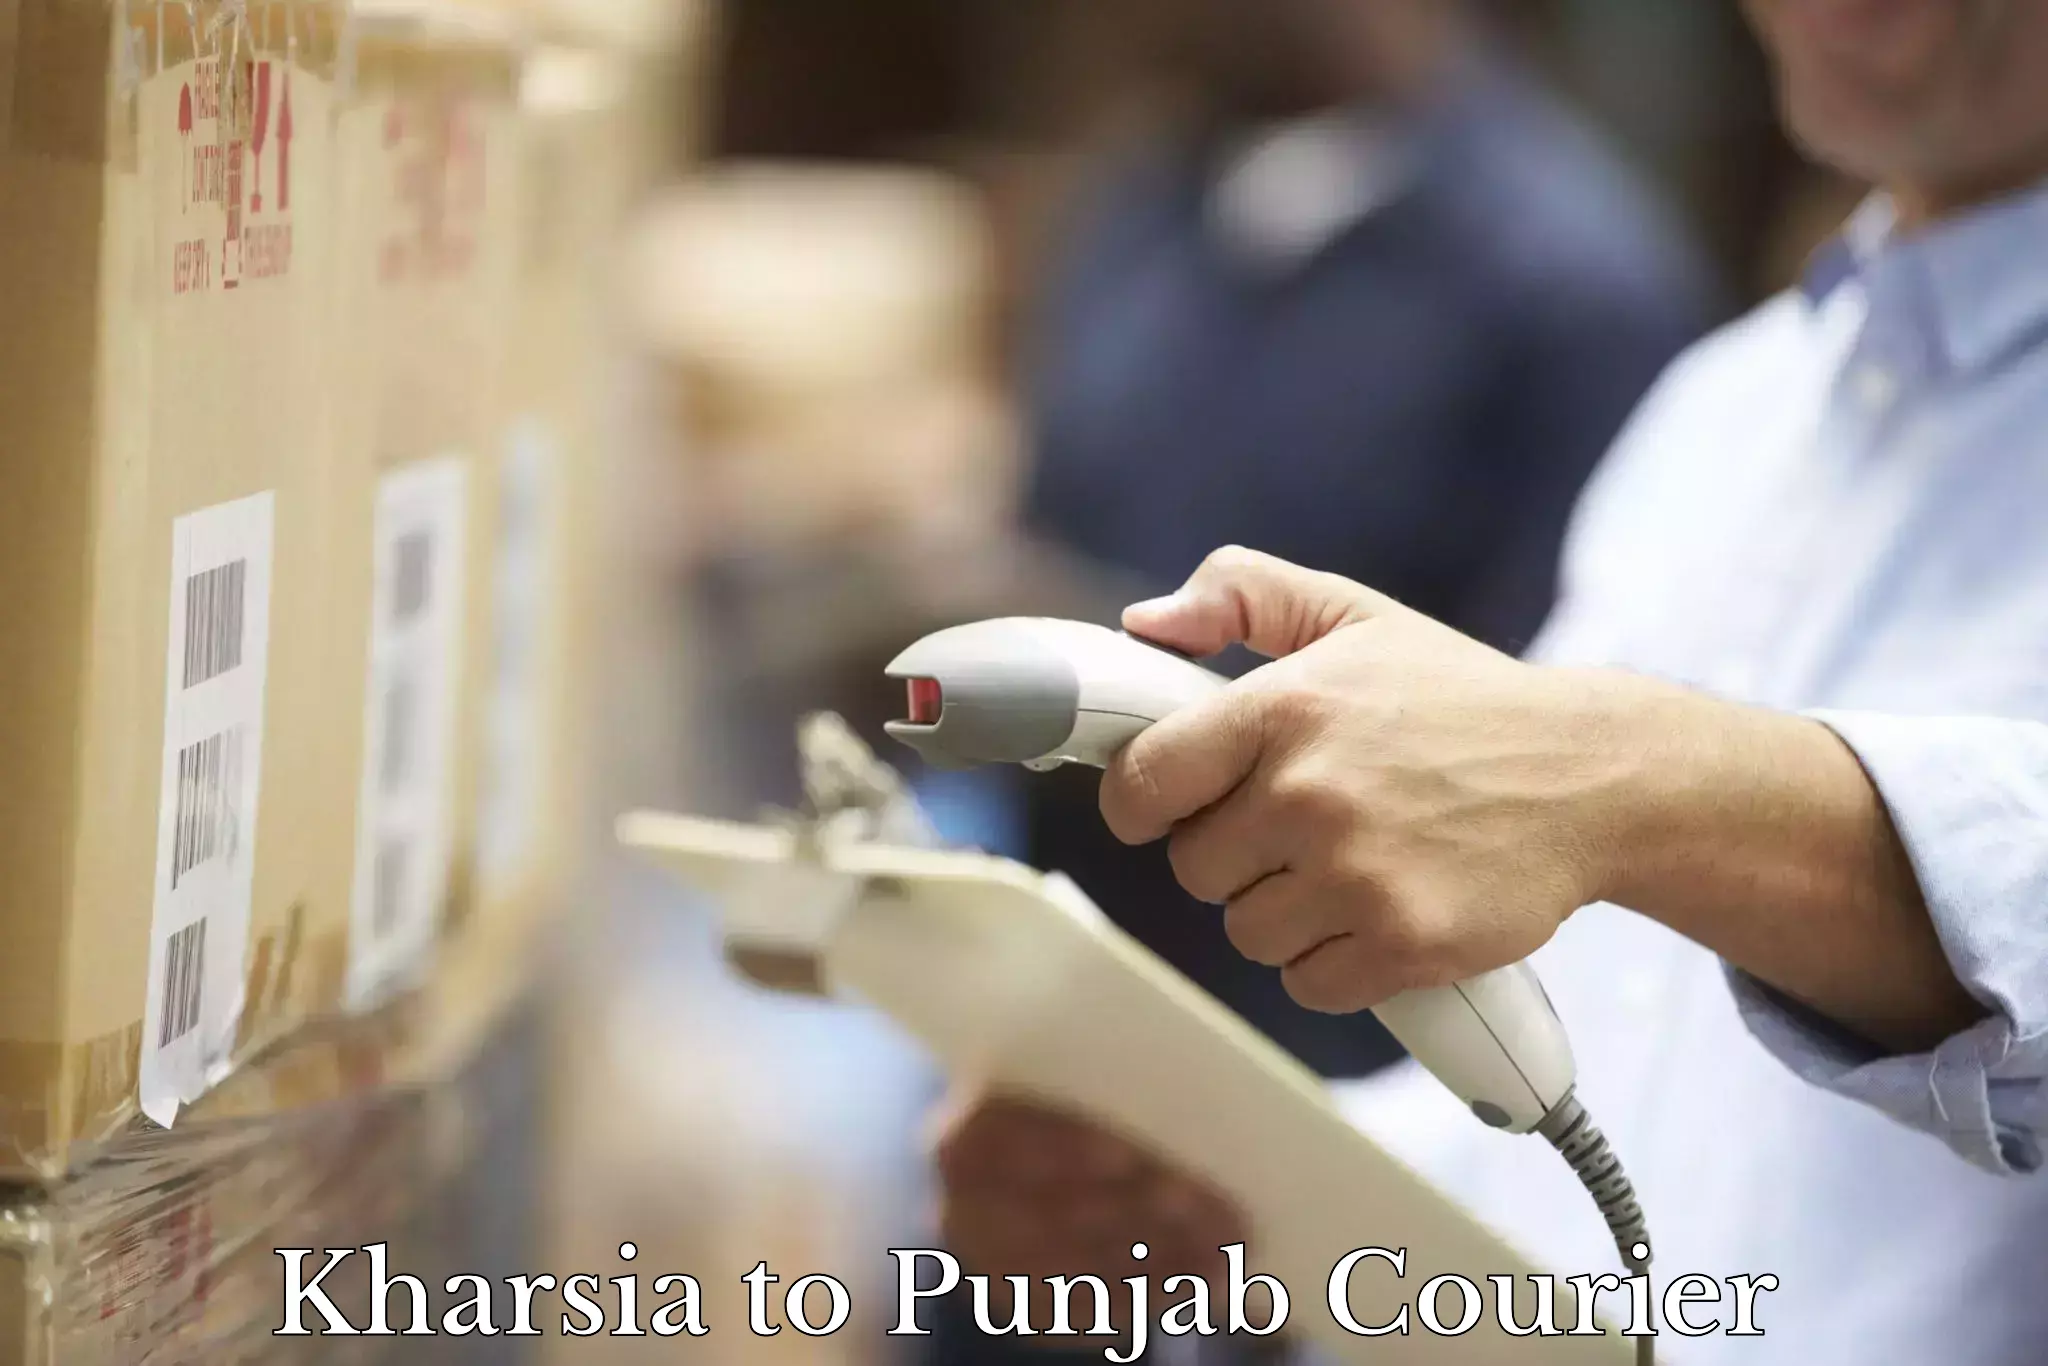 Secure packaging in Kharsia to Ludhiana